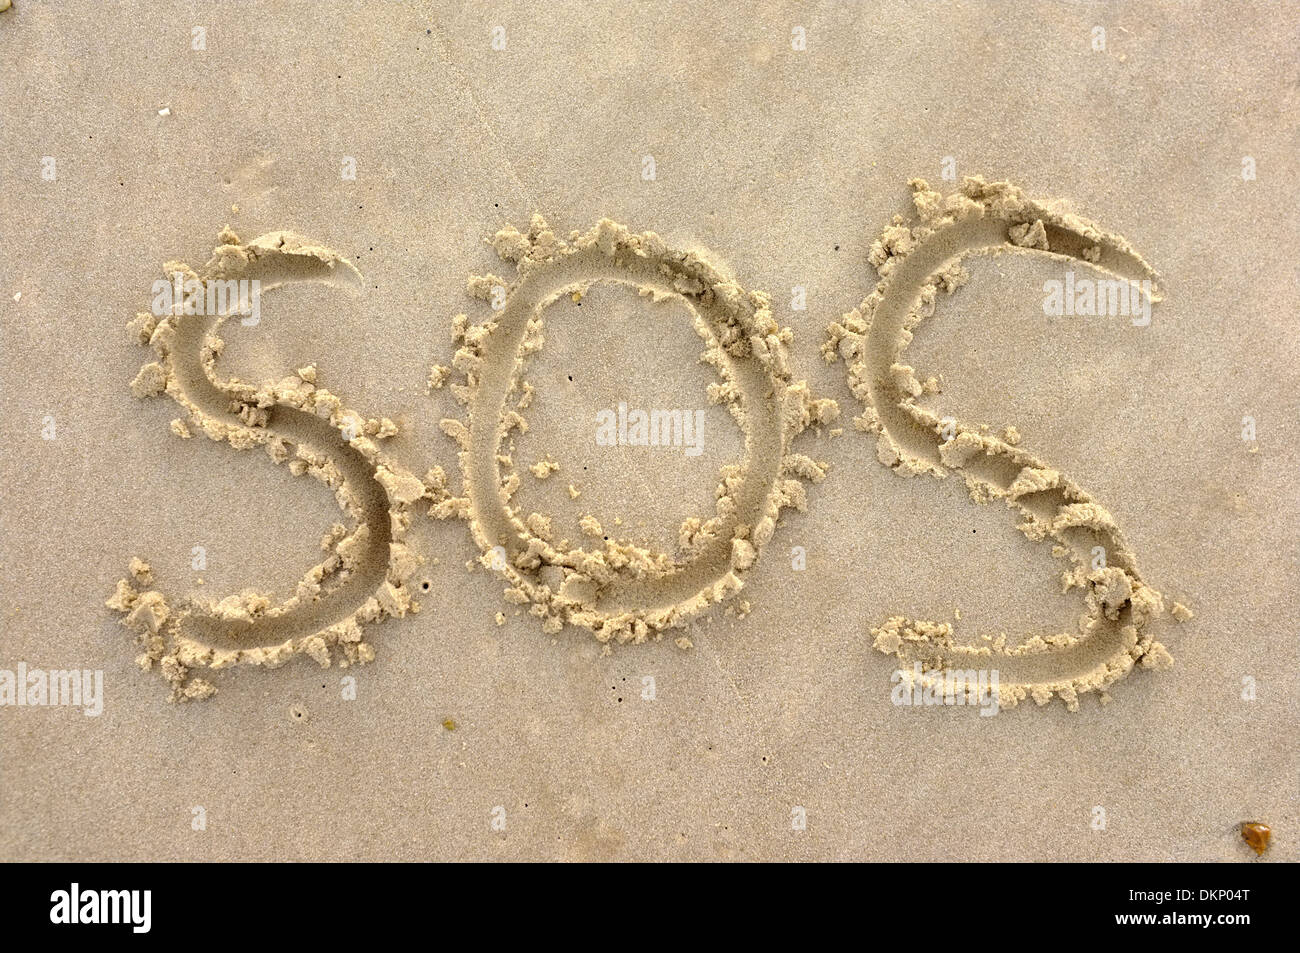 SOS 'Save Our Souls' sign symbol drawn in beach sand Stock Photo